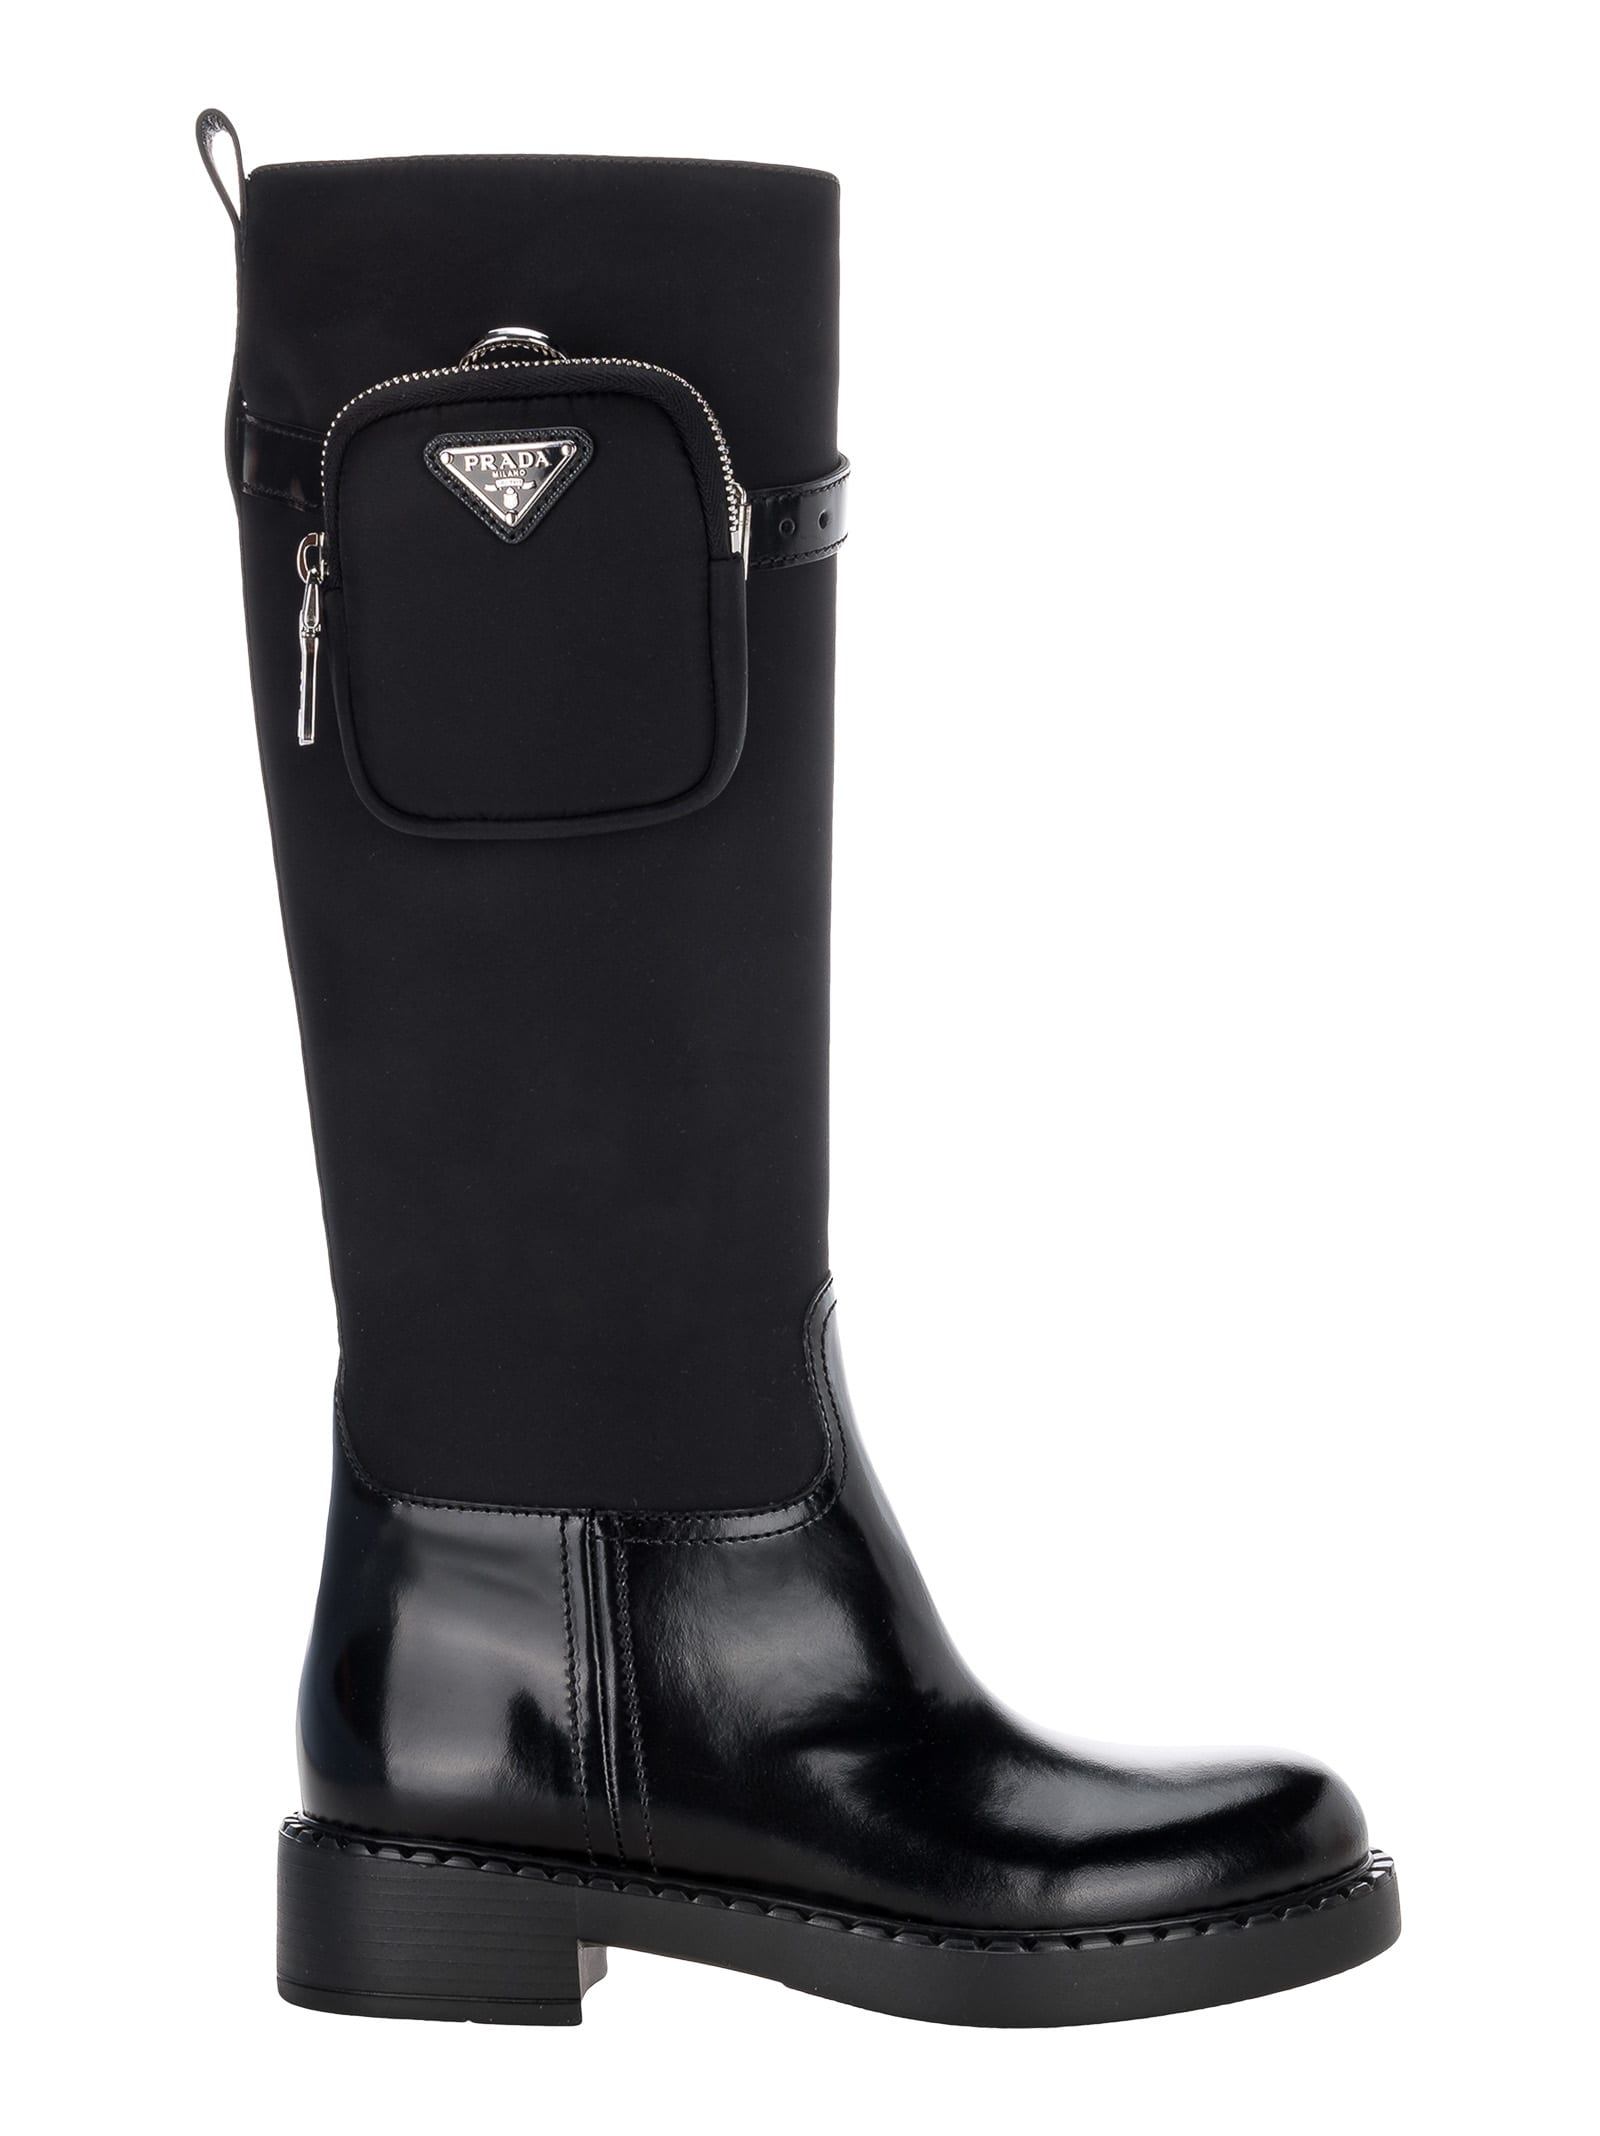 Buy Prada Re-nylon High Boots online, shop Prada shoes with free shipping